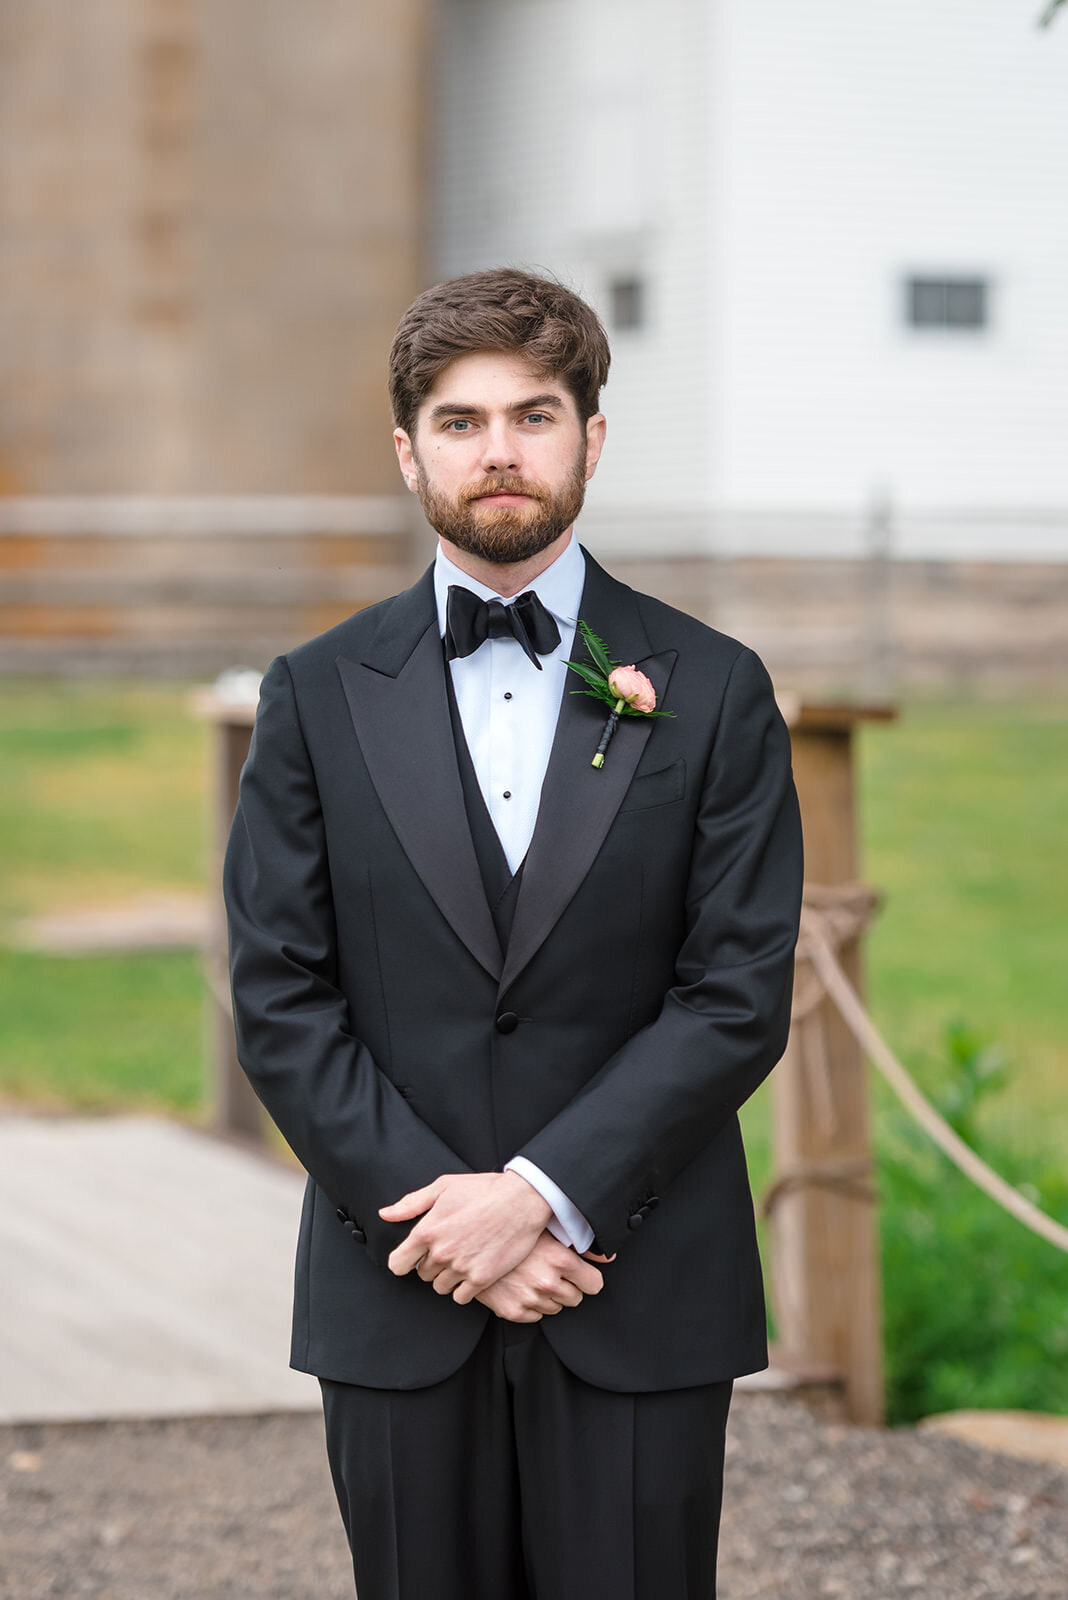 A groom in a black tuxedo standing outdoors with his hands crossed in front of him.